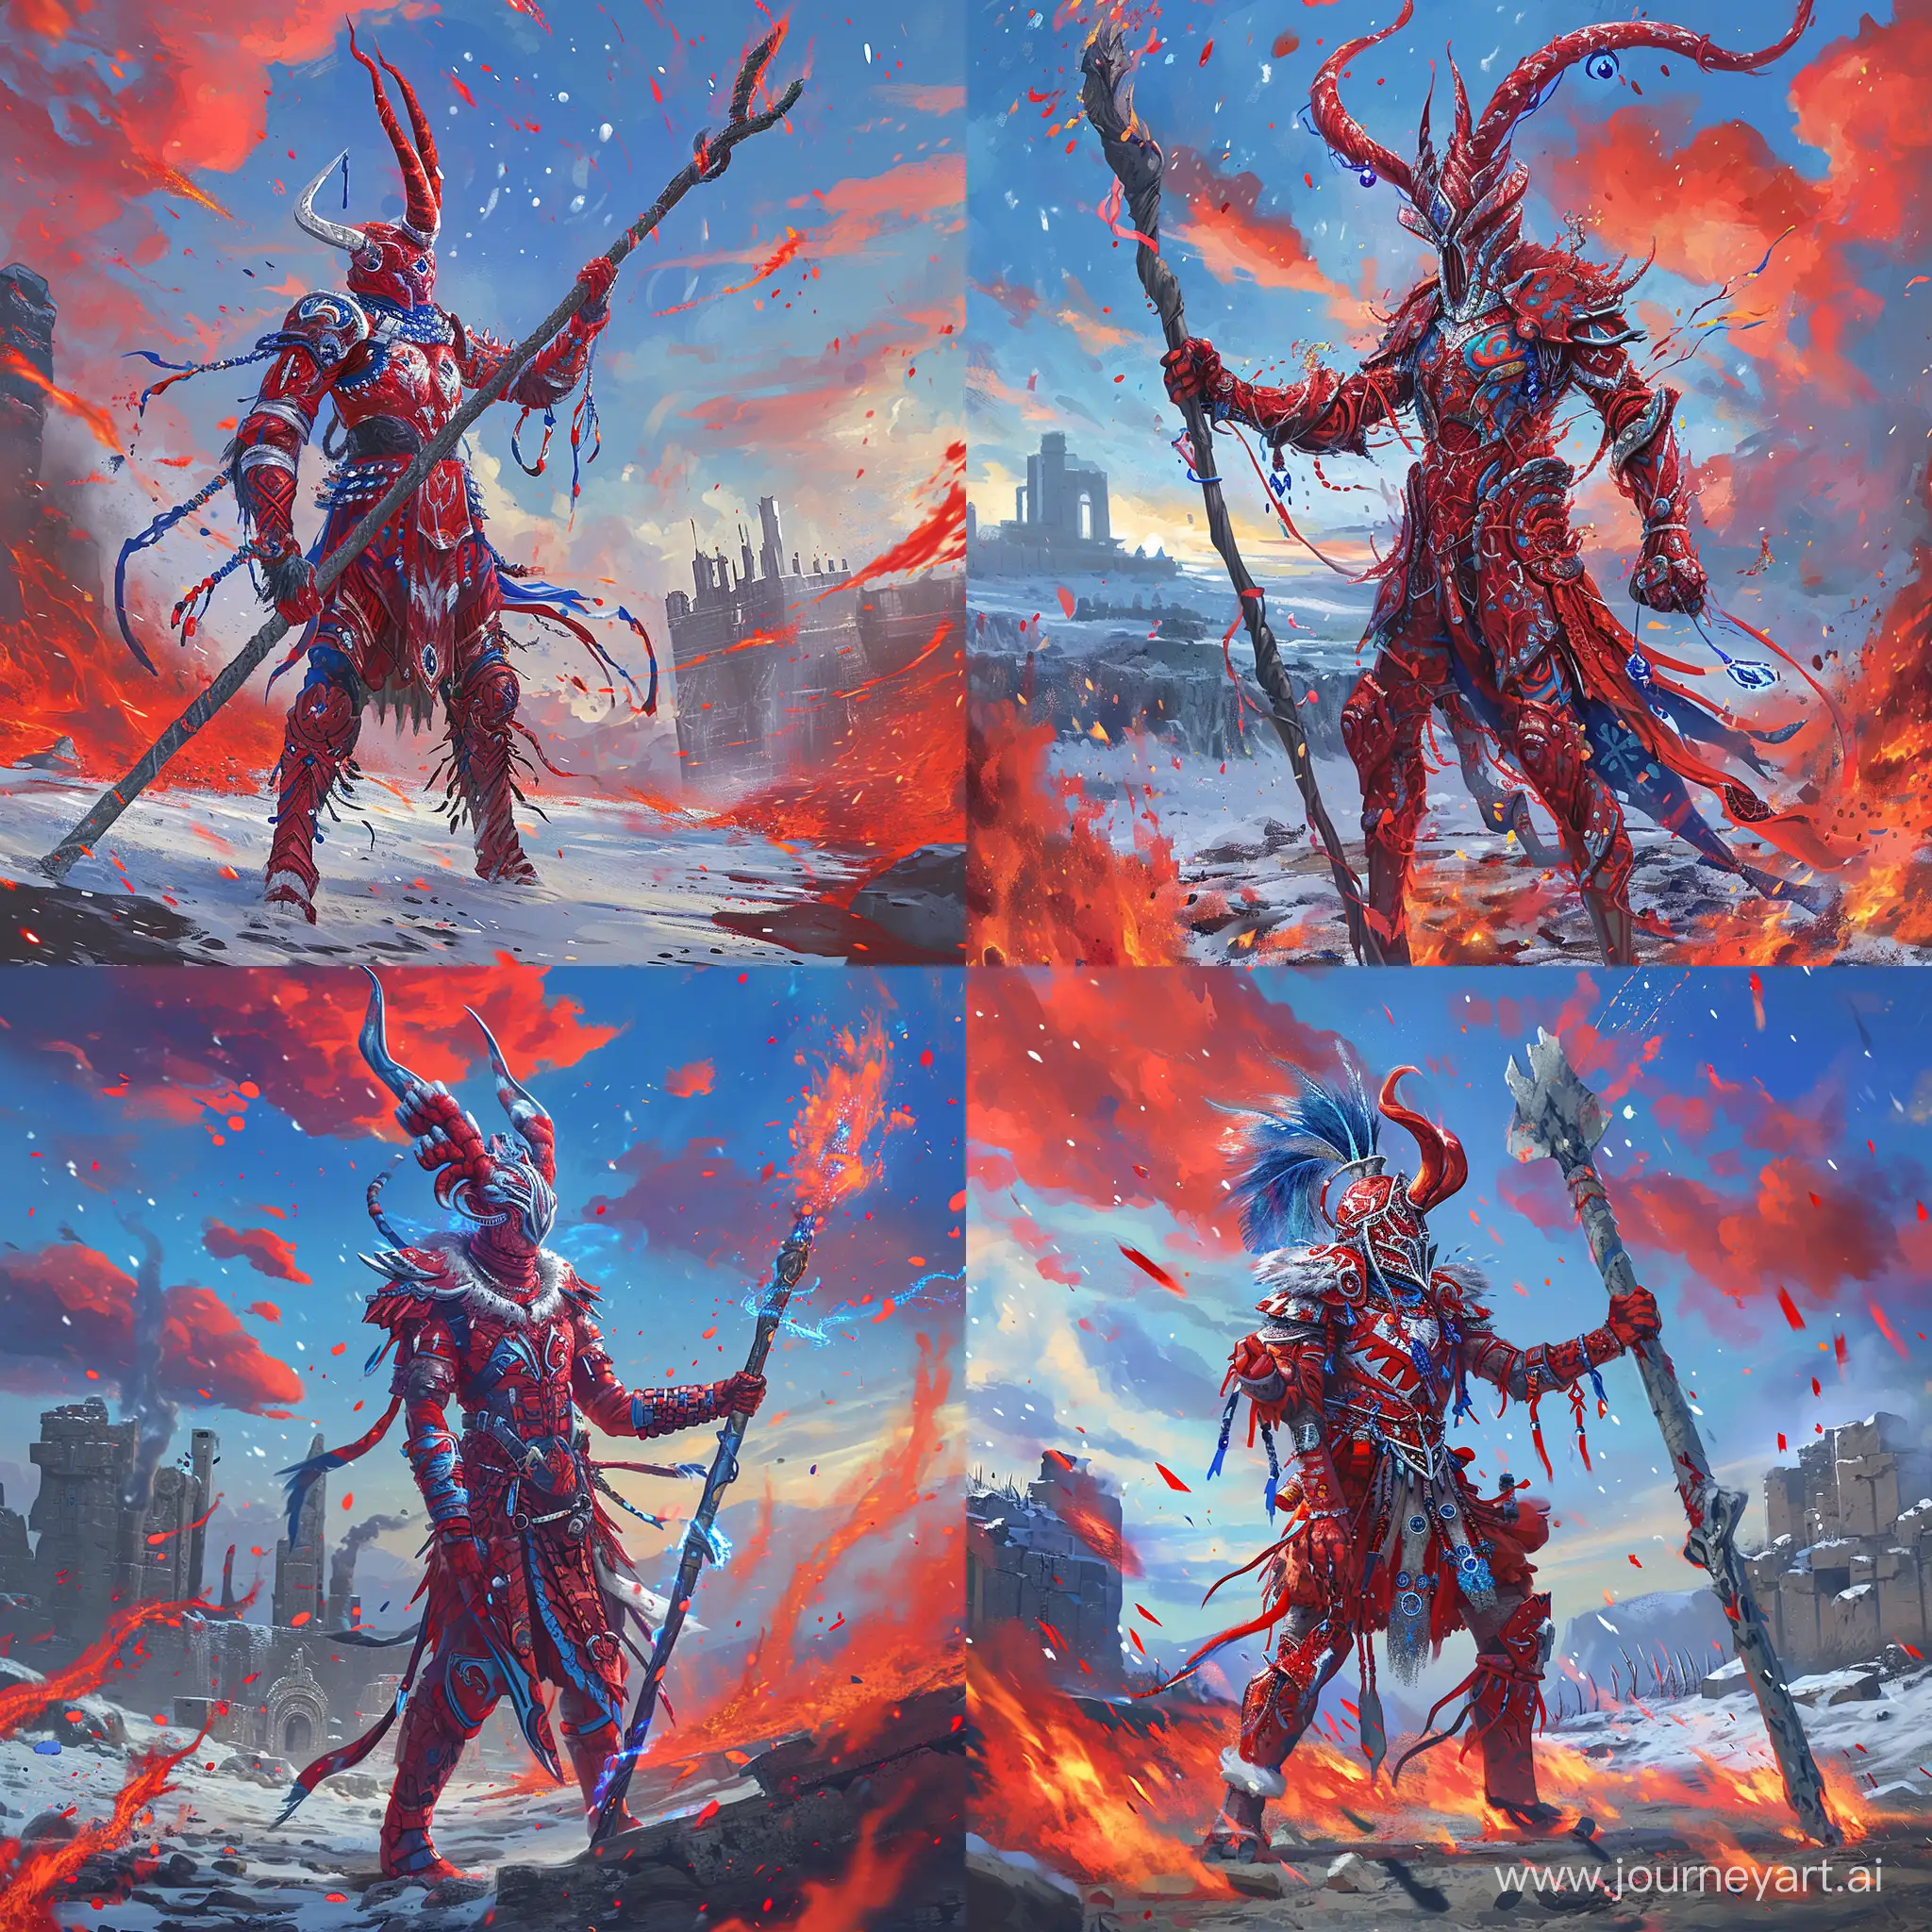 Футуризм, A warrior with a large staff stands in a fiery landscape. The sky is blue with red clouds, and the warrior wears a red armor with white and blue accents. The warrior also has a red helmet with tall horns and red, white, and blue patterns. The staff the warrior is holding is gray with a black and white pattern. The warrior is surrounded by red and blue flames, and there are red and blue sparks flying around. In the background, there are ruins covered in snow. --v 6